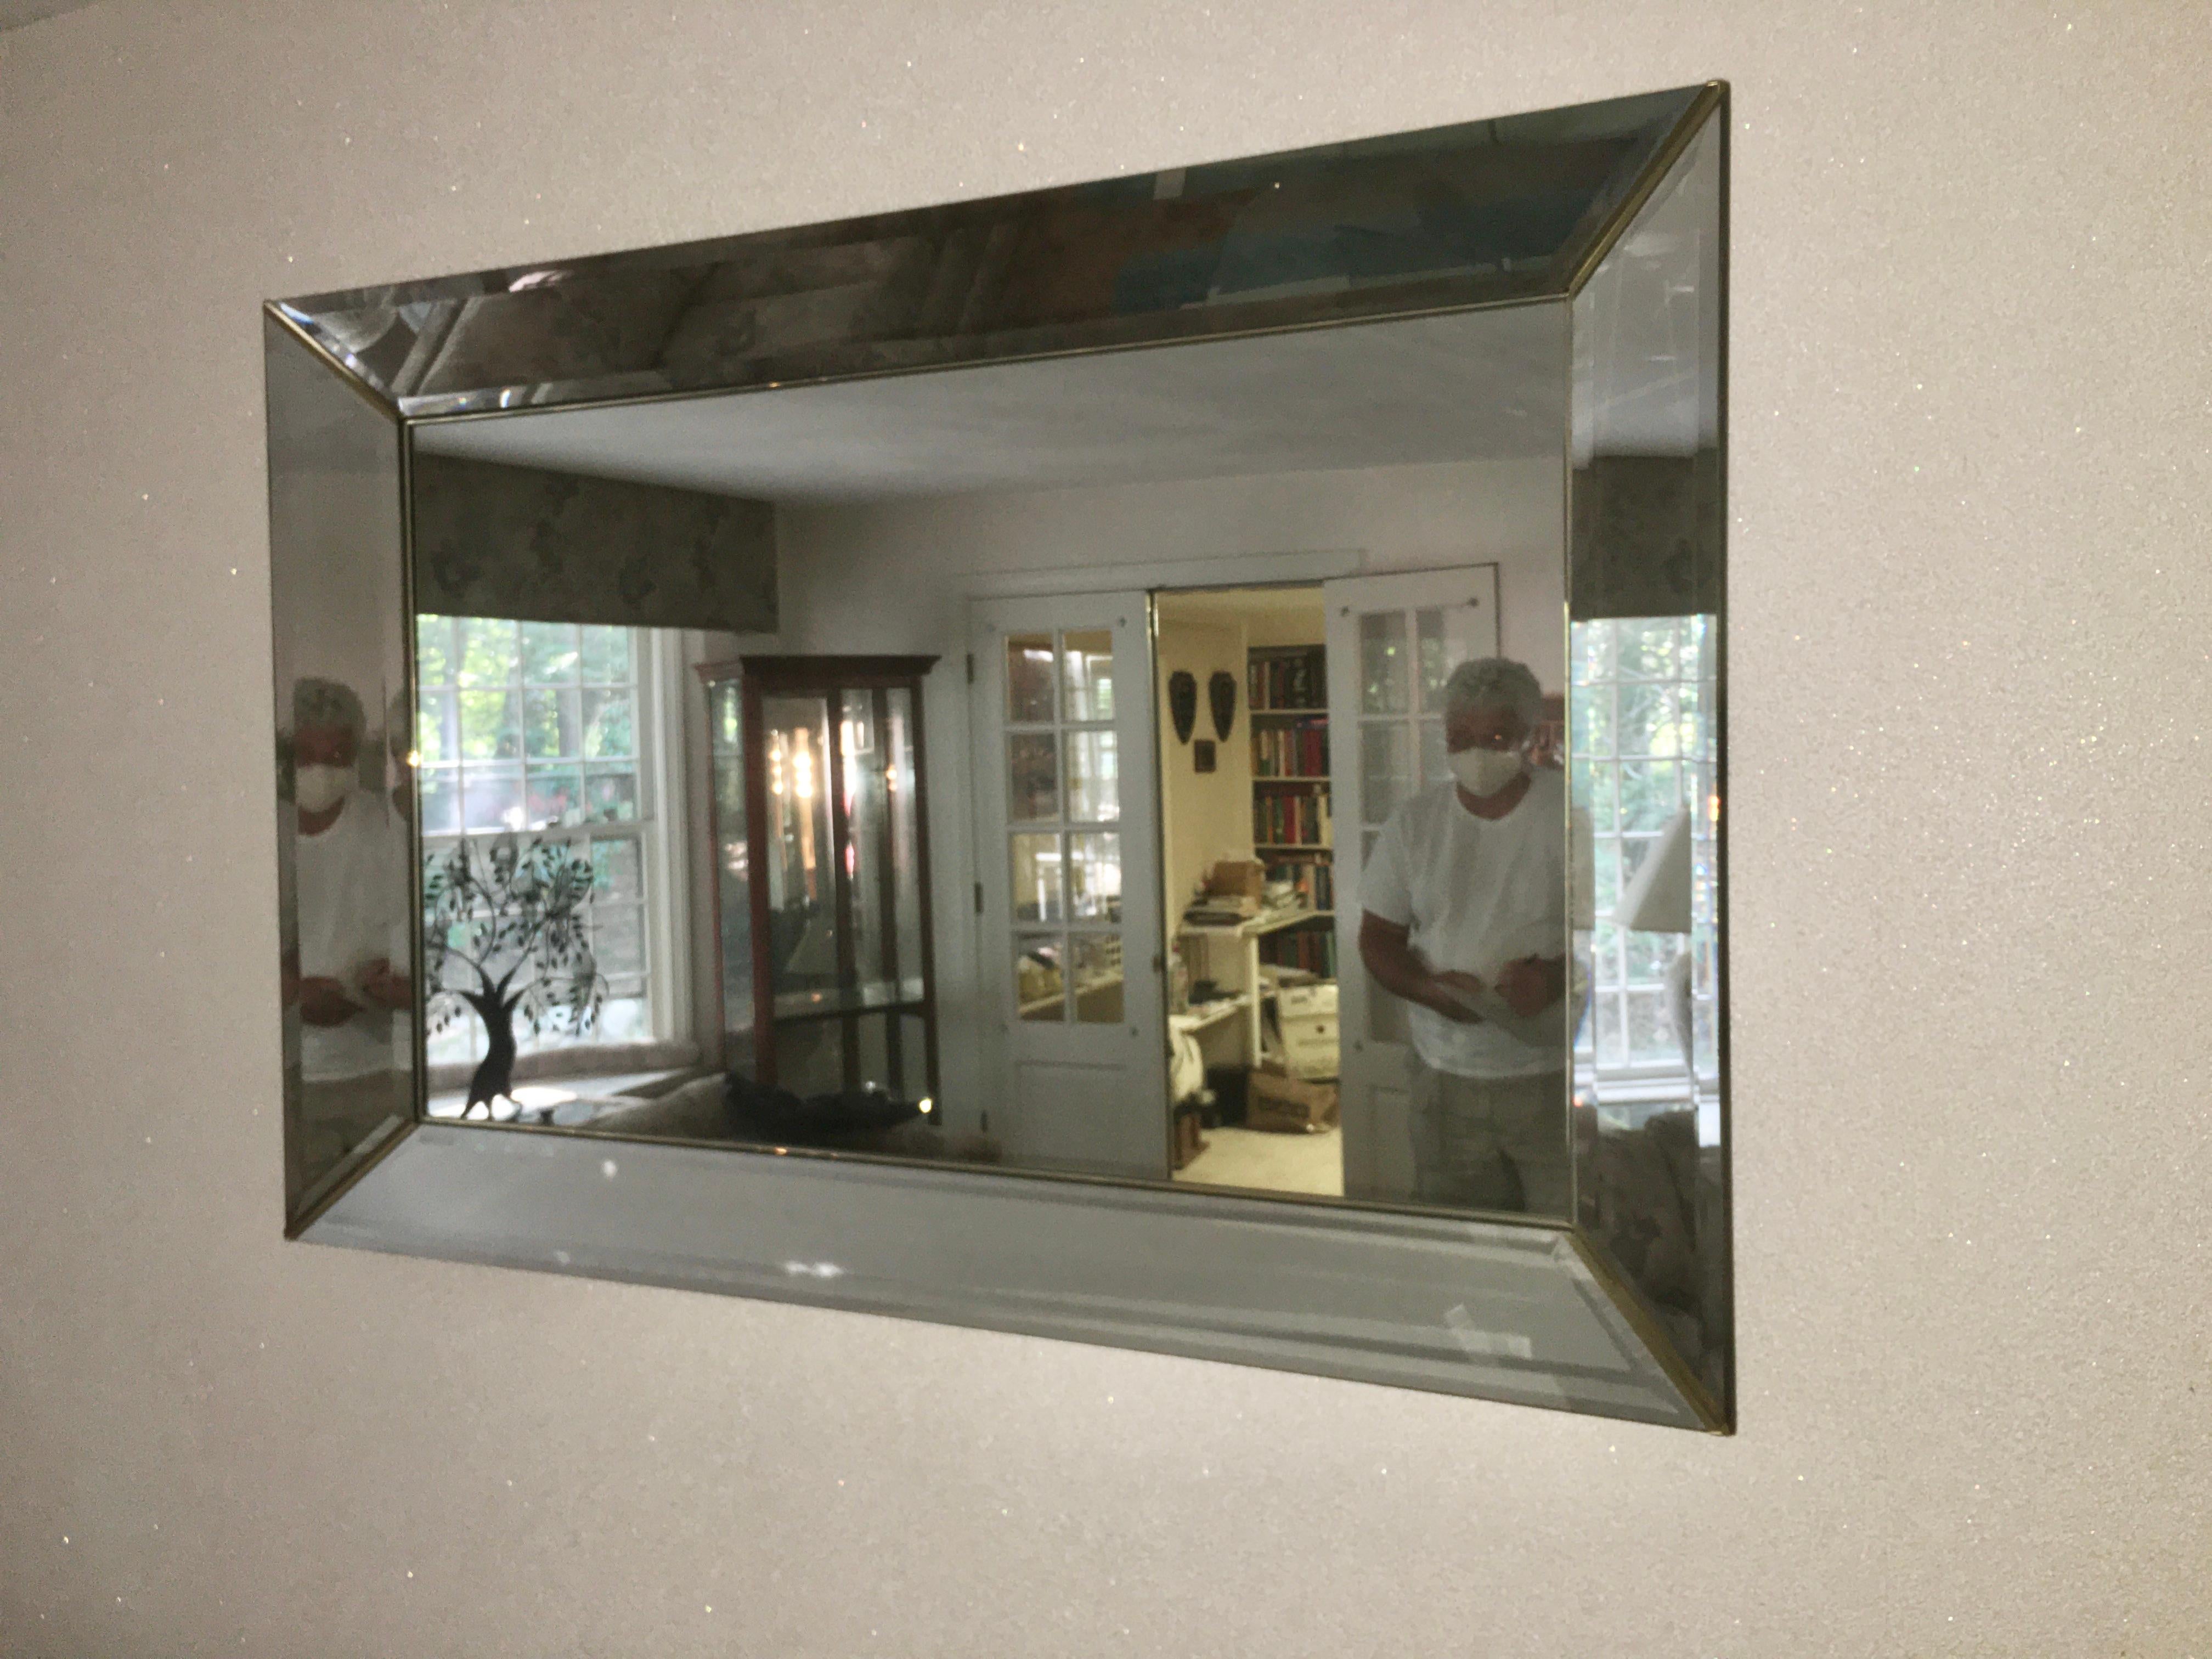 Italian Panel Frame Rectangular Mirror Attributed to Crystal Art In Good Condition For Sale In Hanover, MA